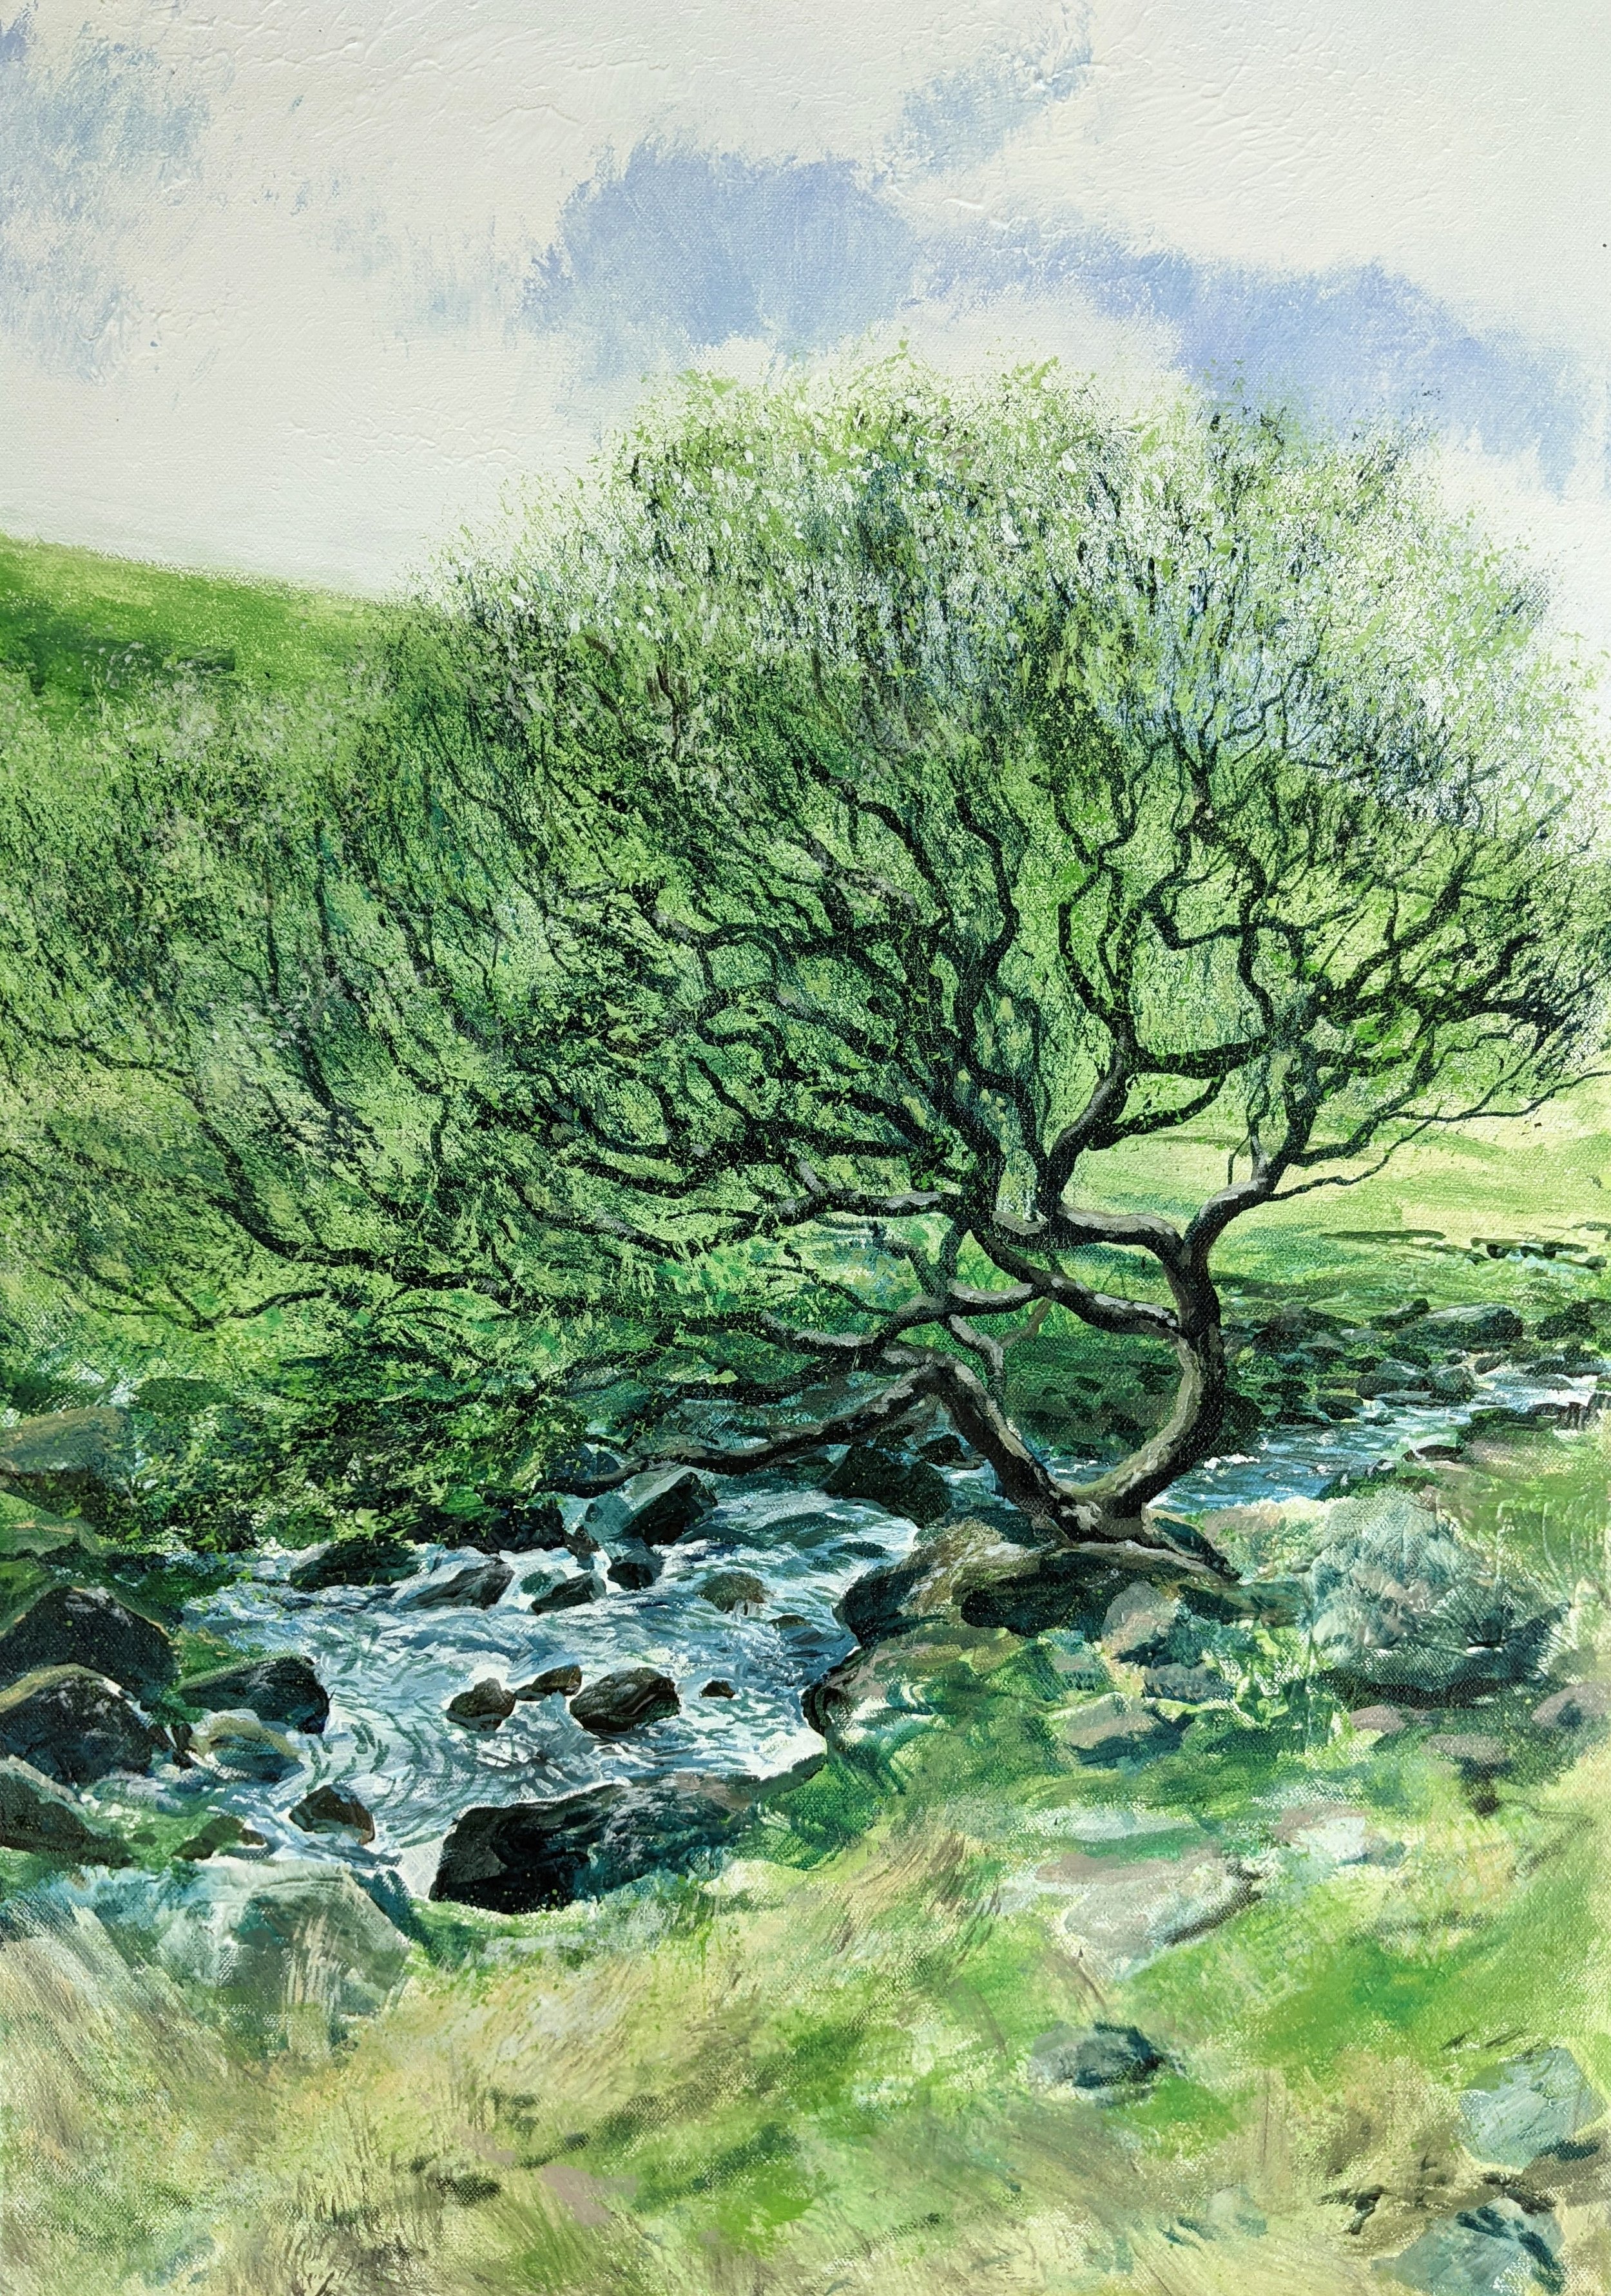 'Boulder's Branch' by Andrew Olly Oliver acrylic on Canvas jpg copy.jpg